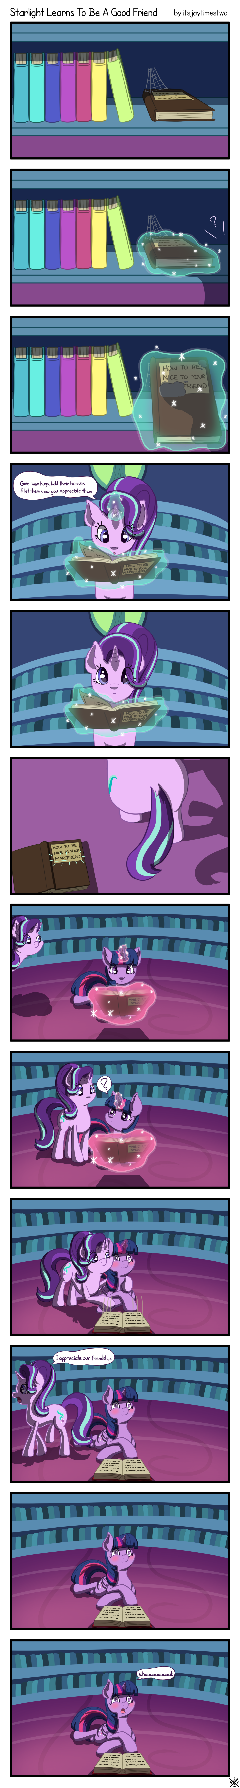 Starlight Learns to Be A Good Friend - Full Comic